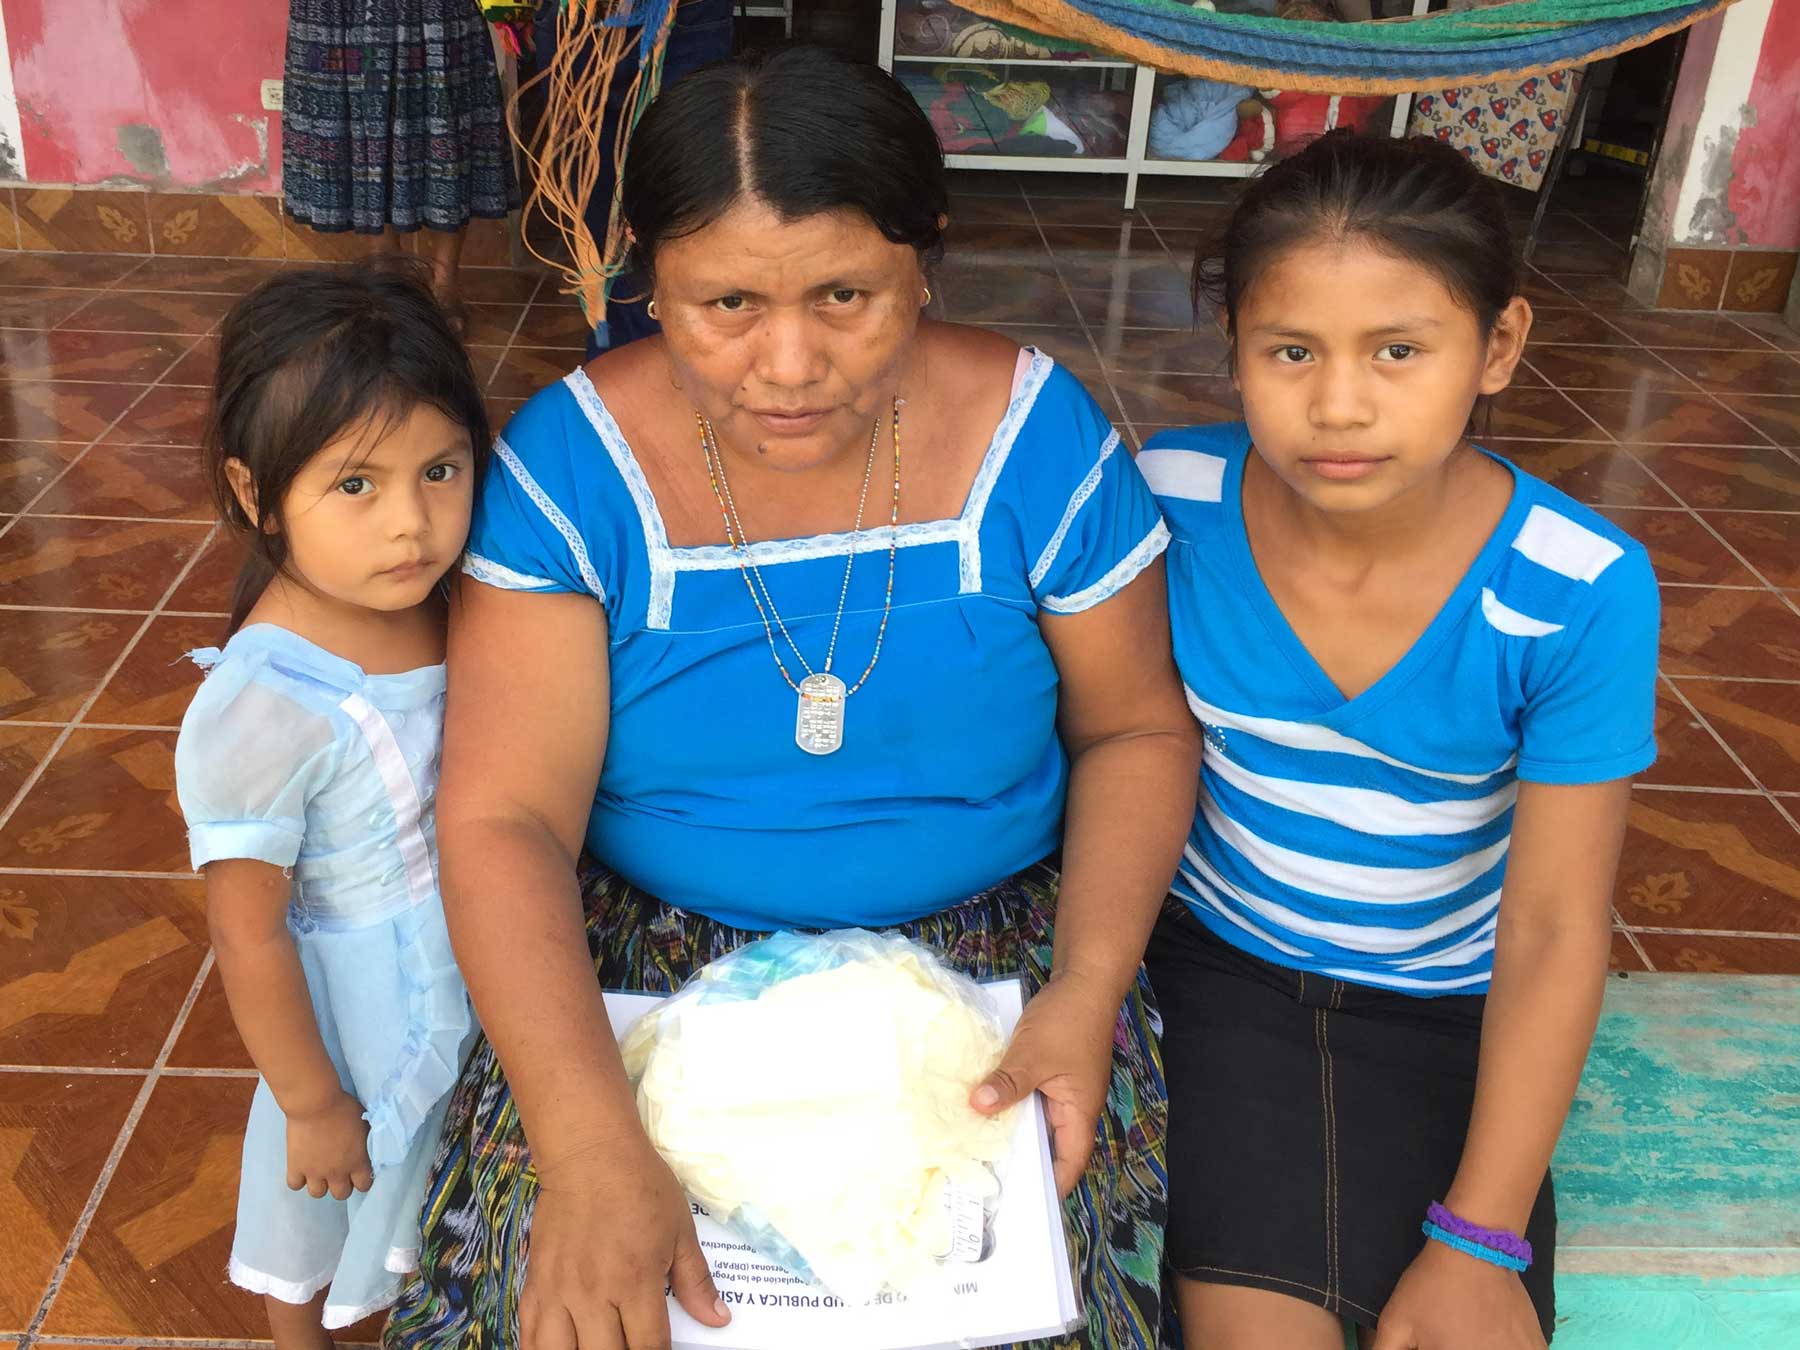 A midwife with two young children, all wearing the colors of the Guatemalan flag